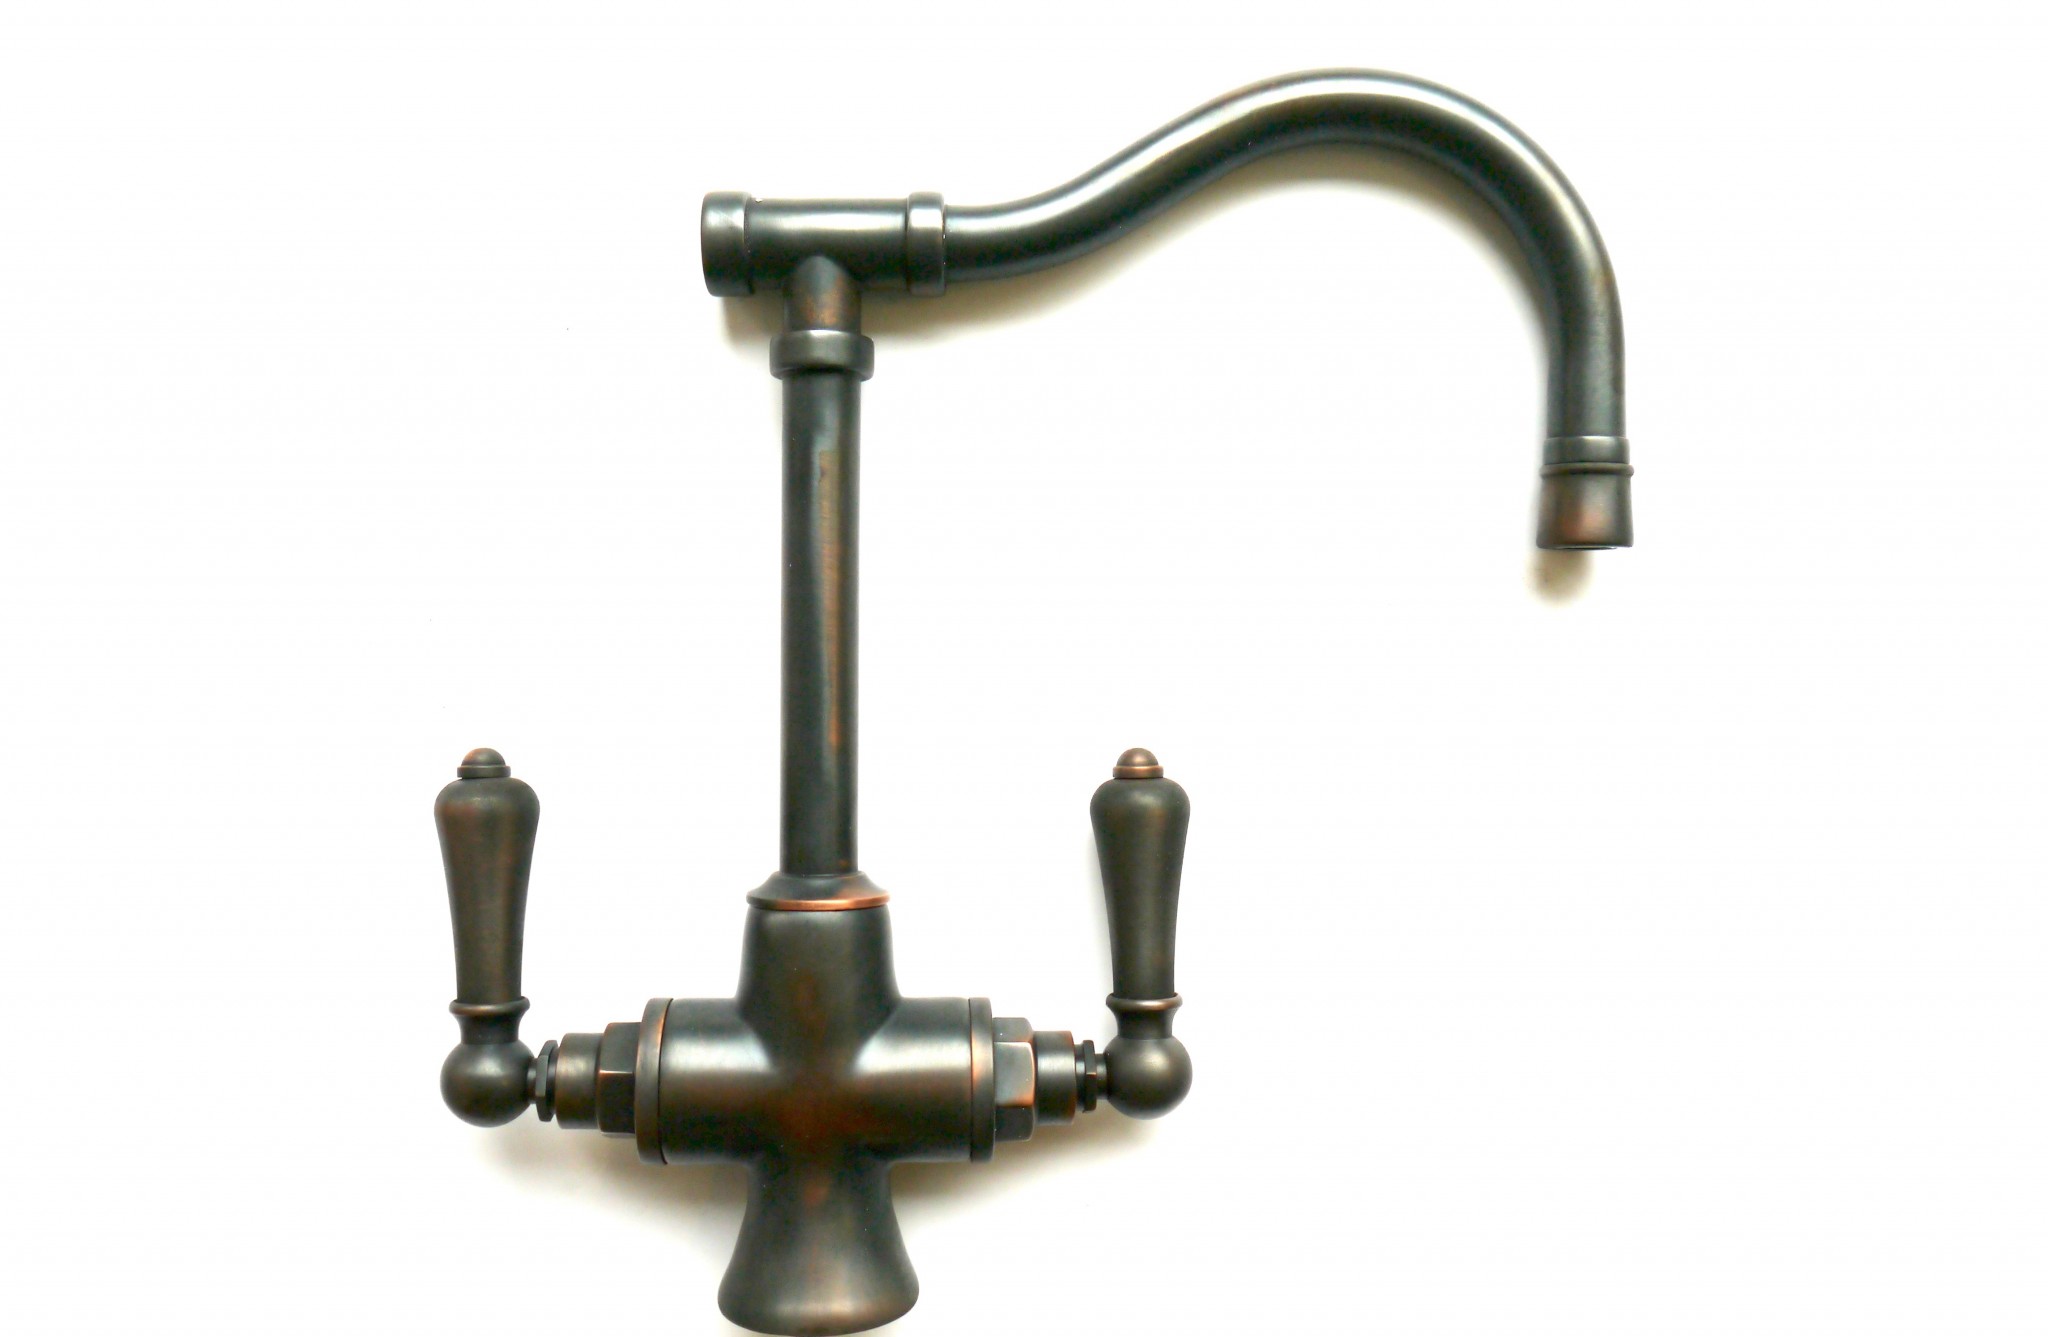 Hove Kitchen Mixer in Weathered Copper Finish with Metal Leavers